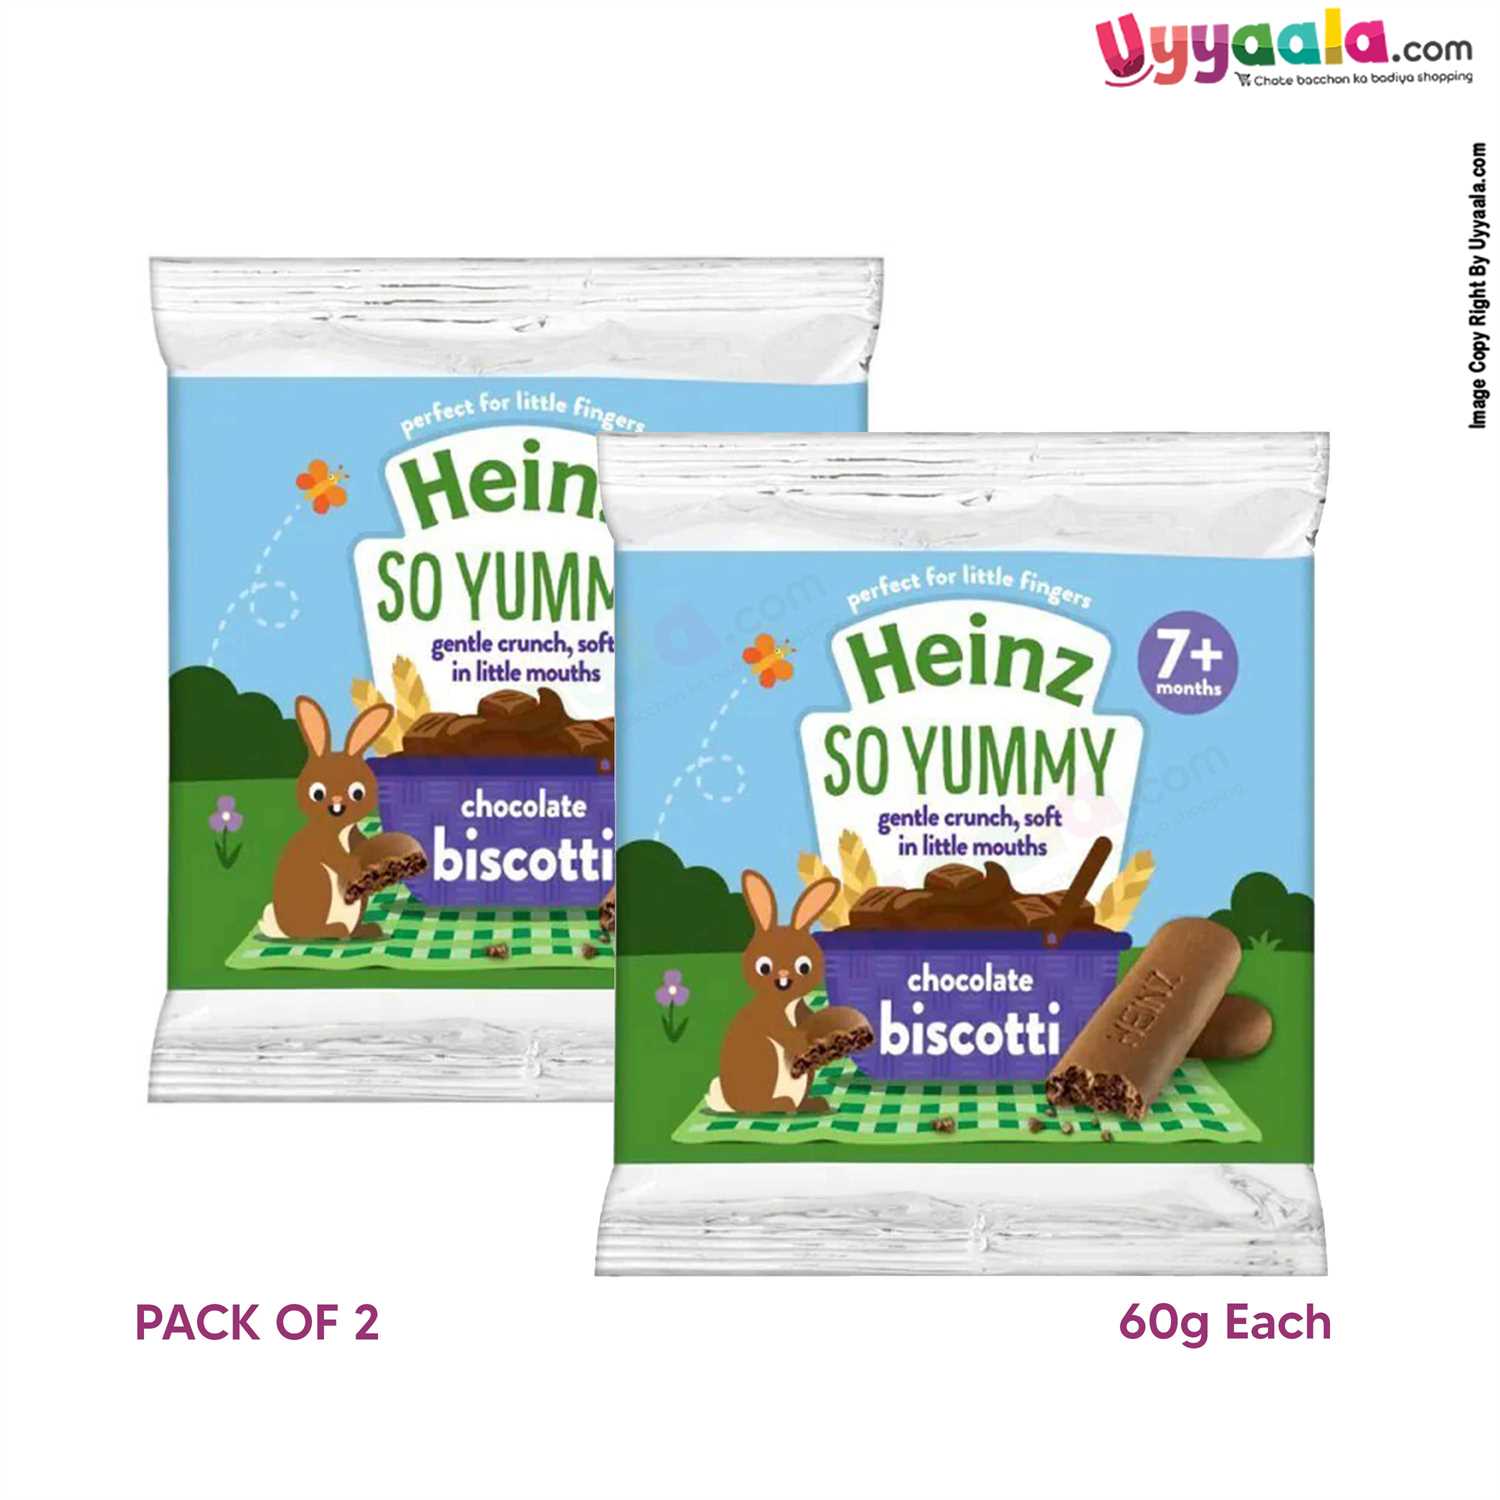 HEINZ SO YUMMY Chocolate biscotti for Kids snacks Pack of 2 - Chocolate Biscuits (60 g each), 7months+